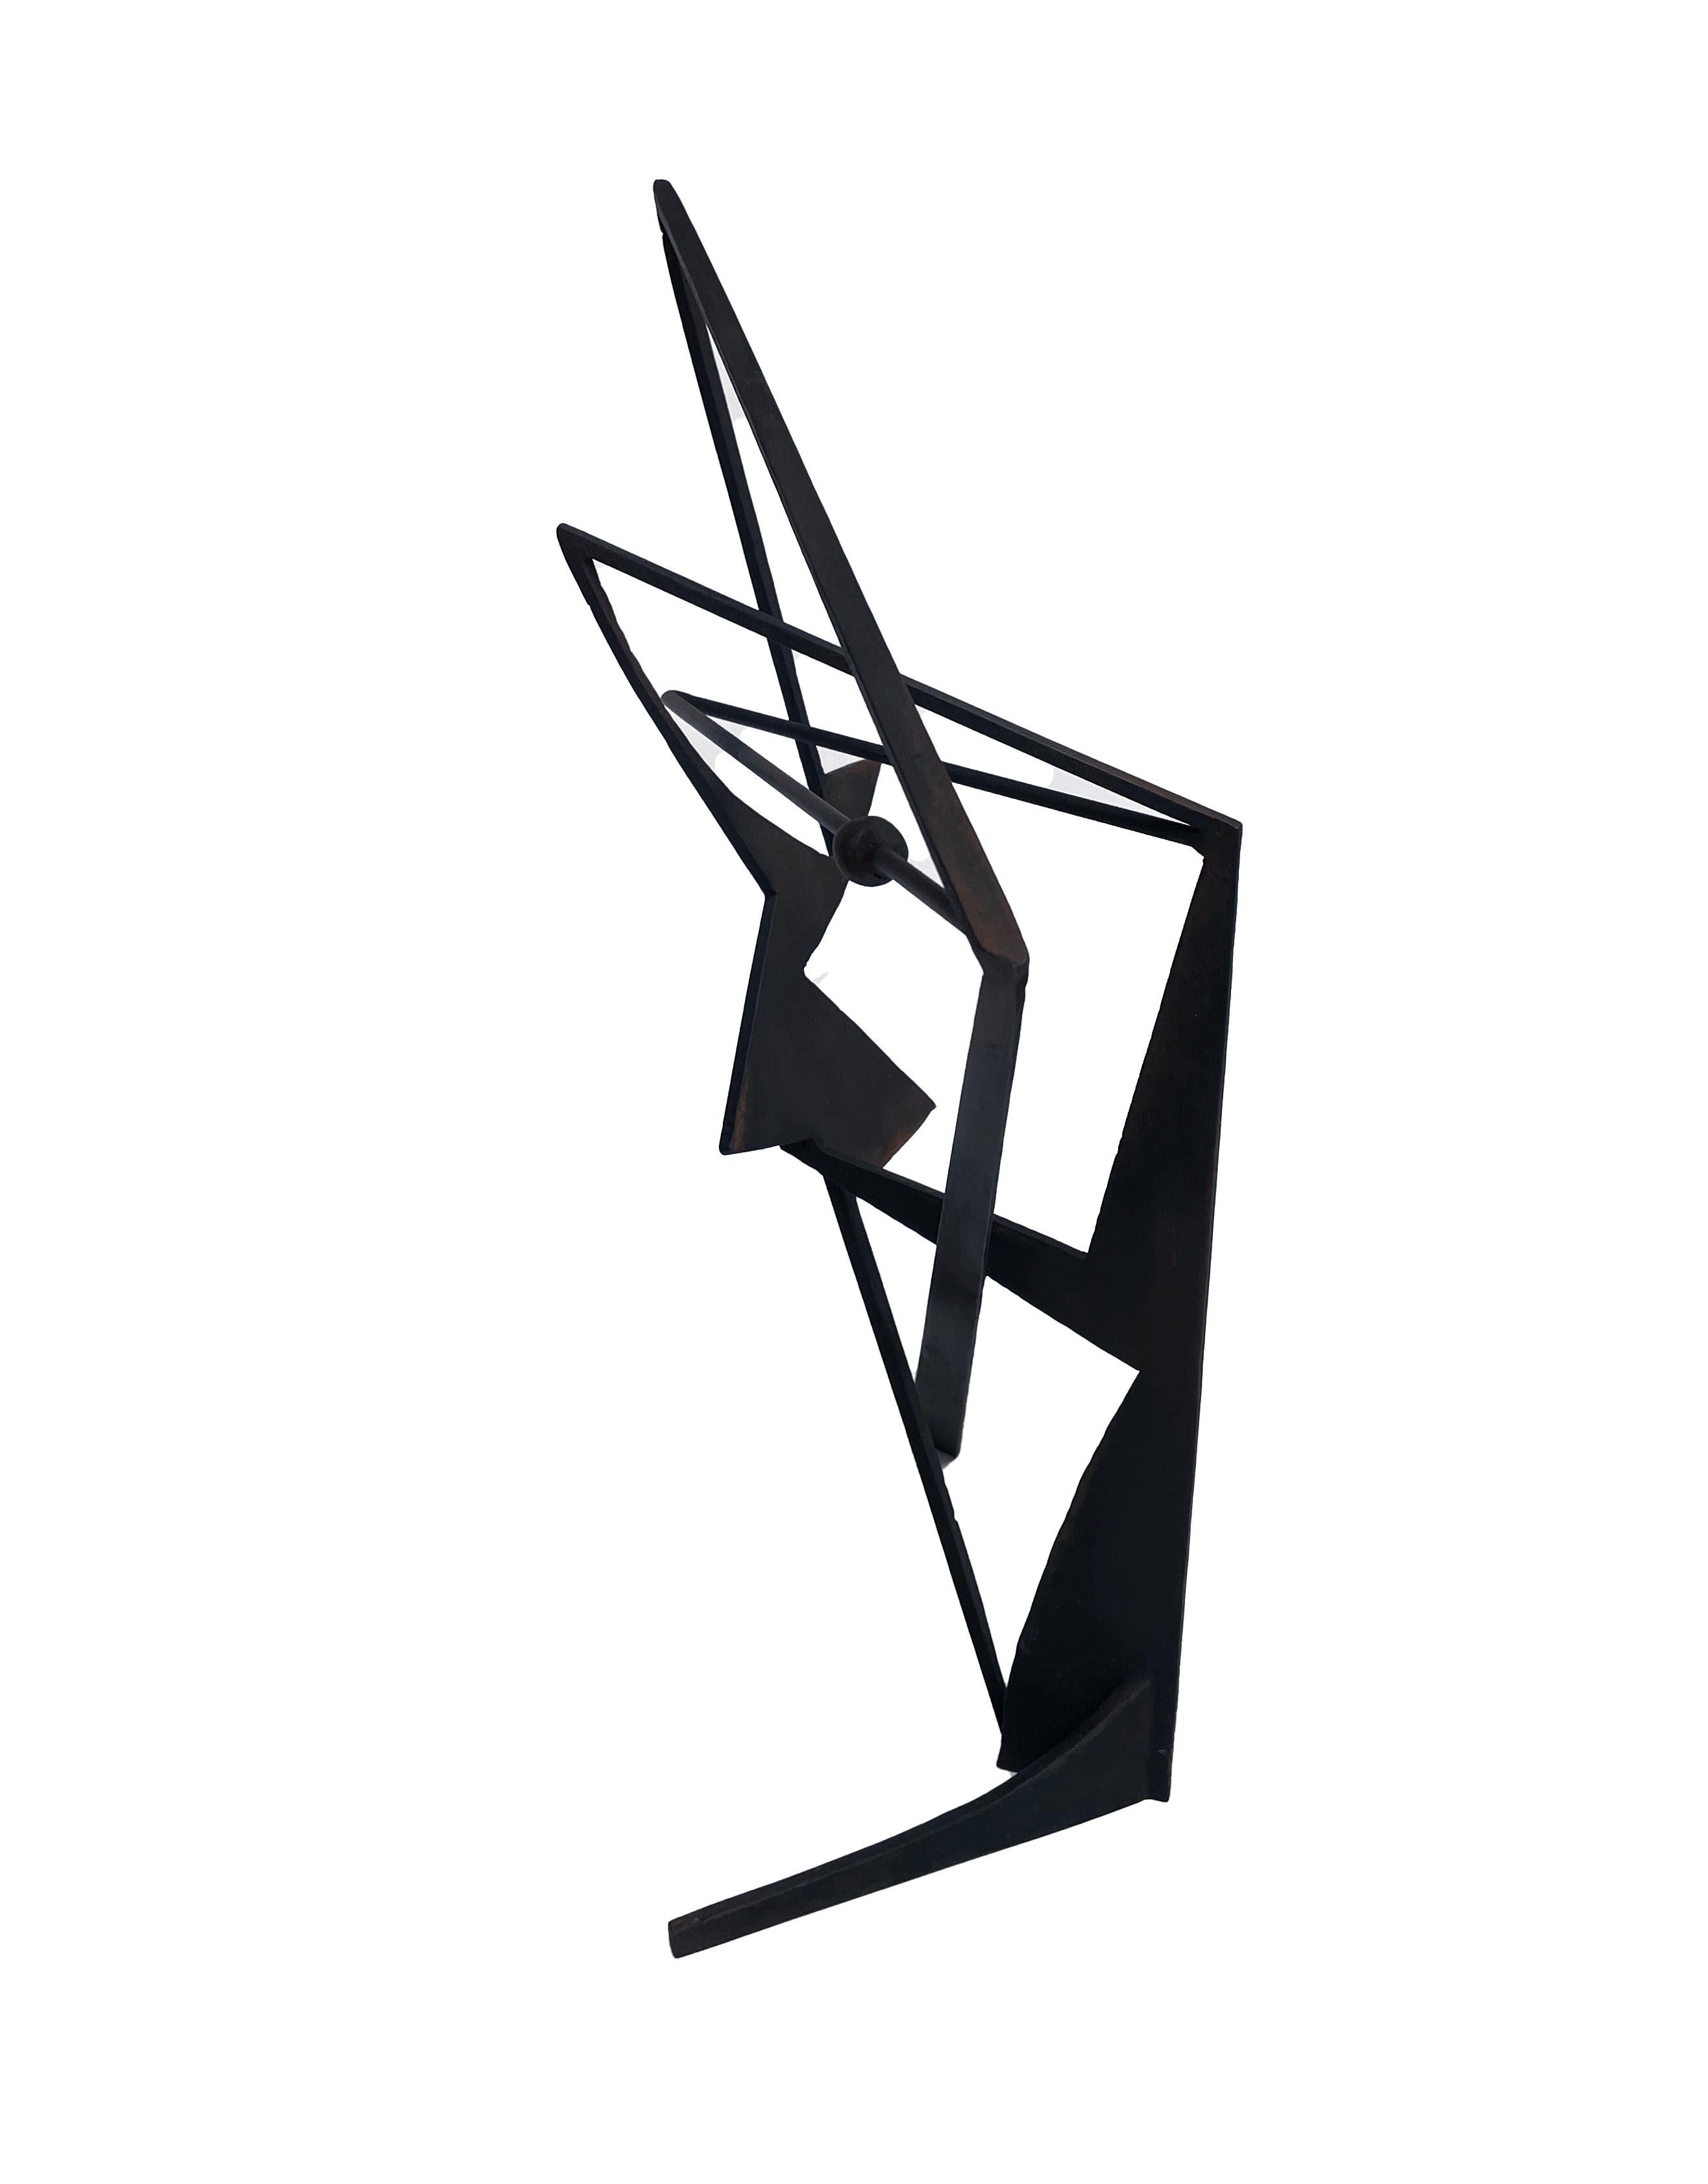 The Shortest Distance - Abstract Geometric Form, Welded Steel Sculpture  - Black Abstract Sculpture by Chris Hill